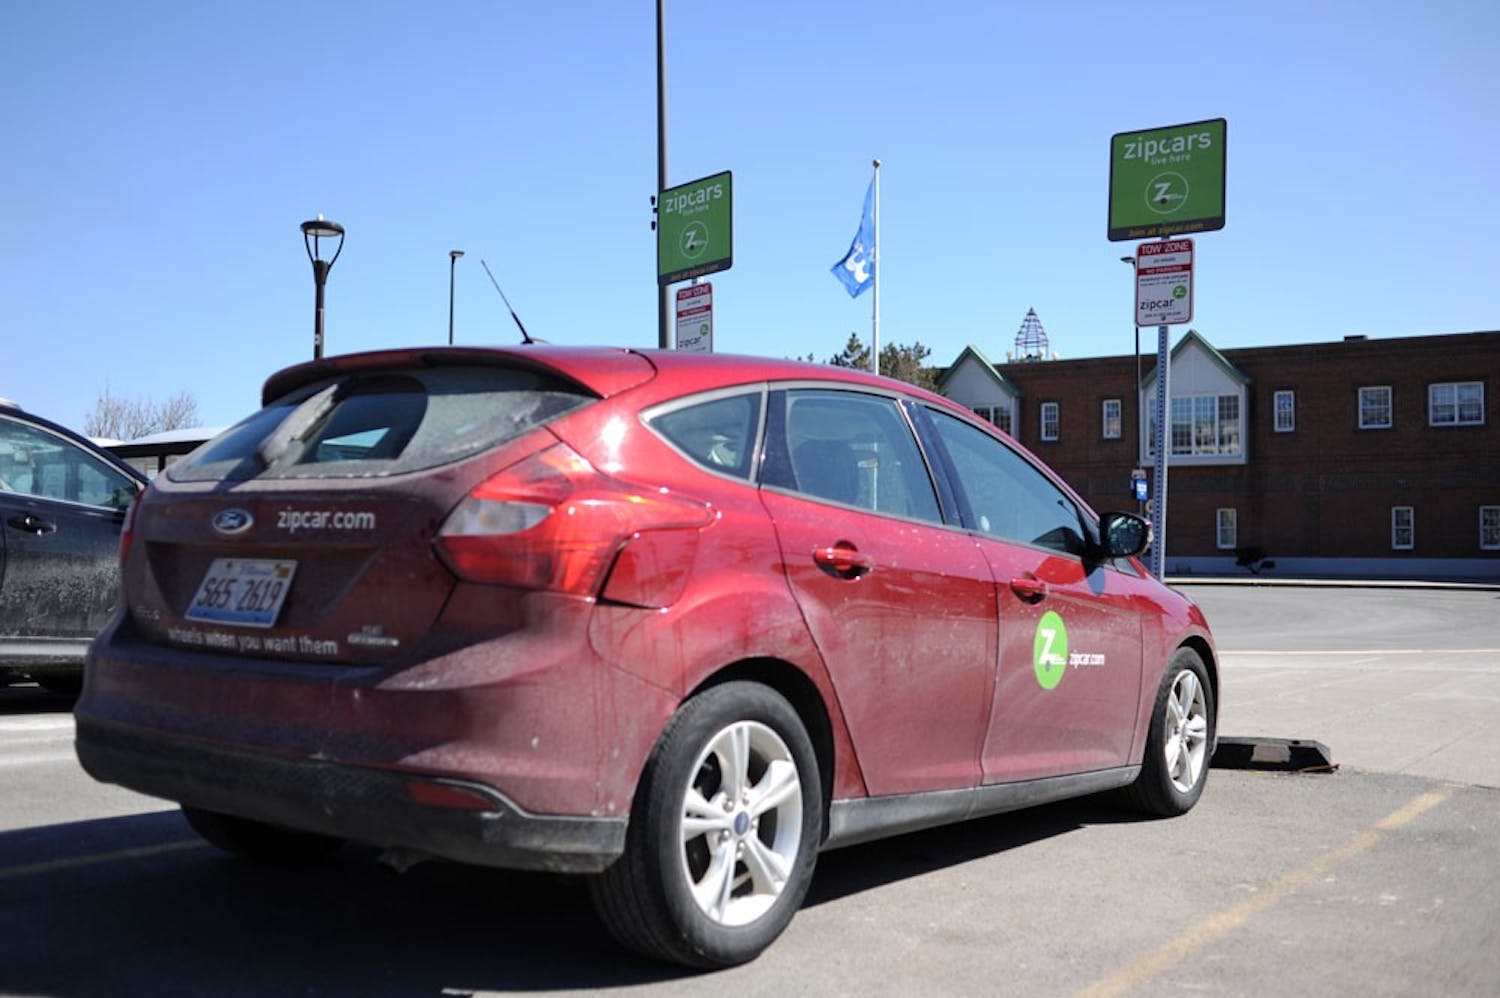 Zipcar is a car-sharing company that provides automobiles to students on campus. Members are given free reserved parking spaces and the cars include gas, mileage and insurance.